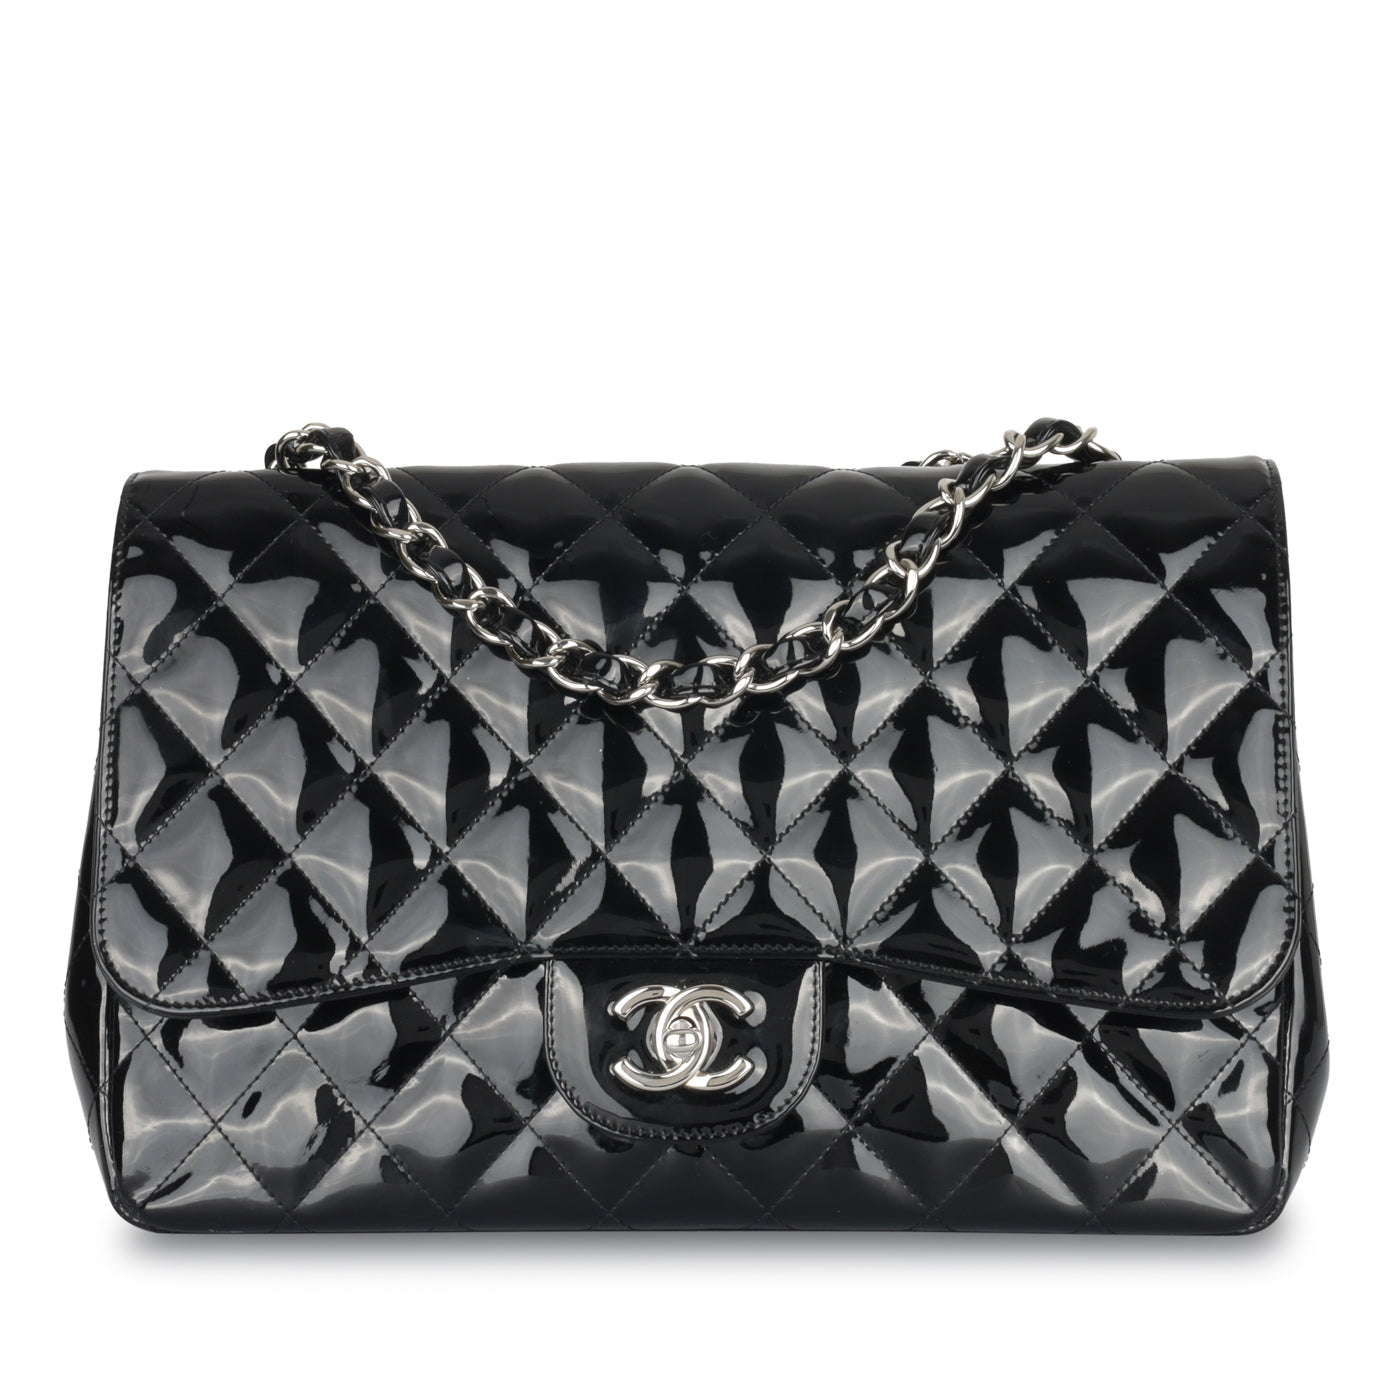 Chanel - Classic Flap Bag - Jumbo - Double Flap - Pre-Loved - Patent - SHW